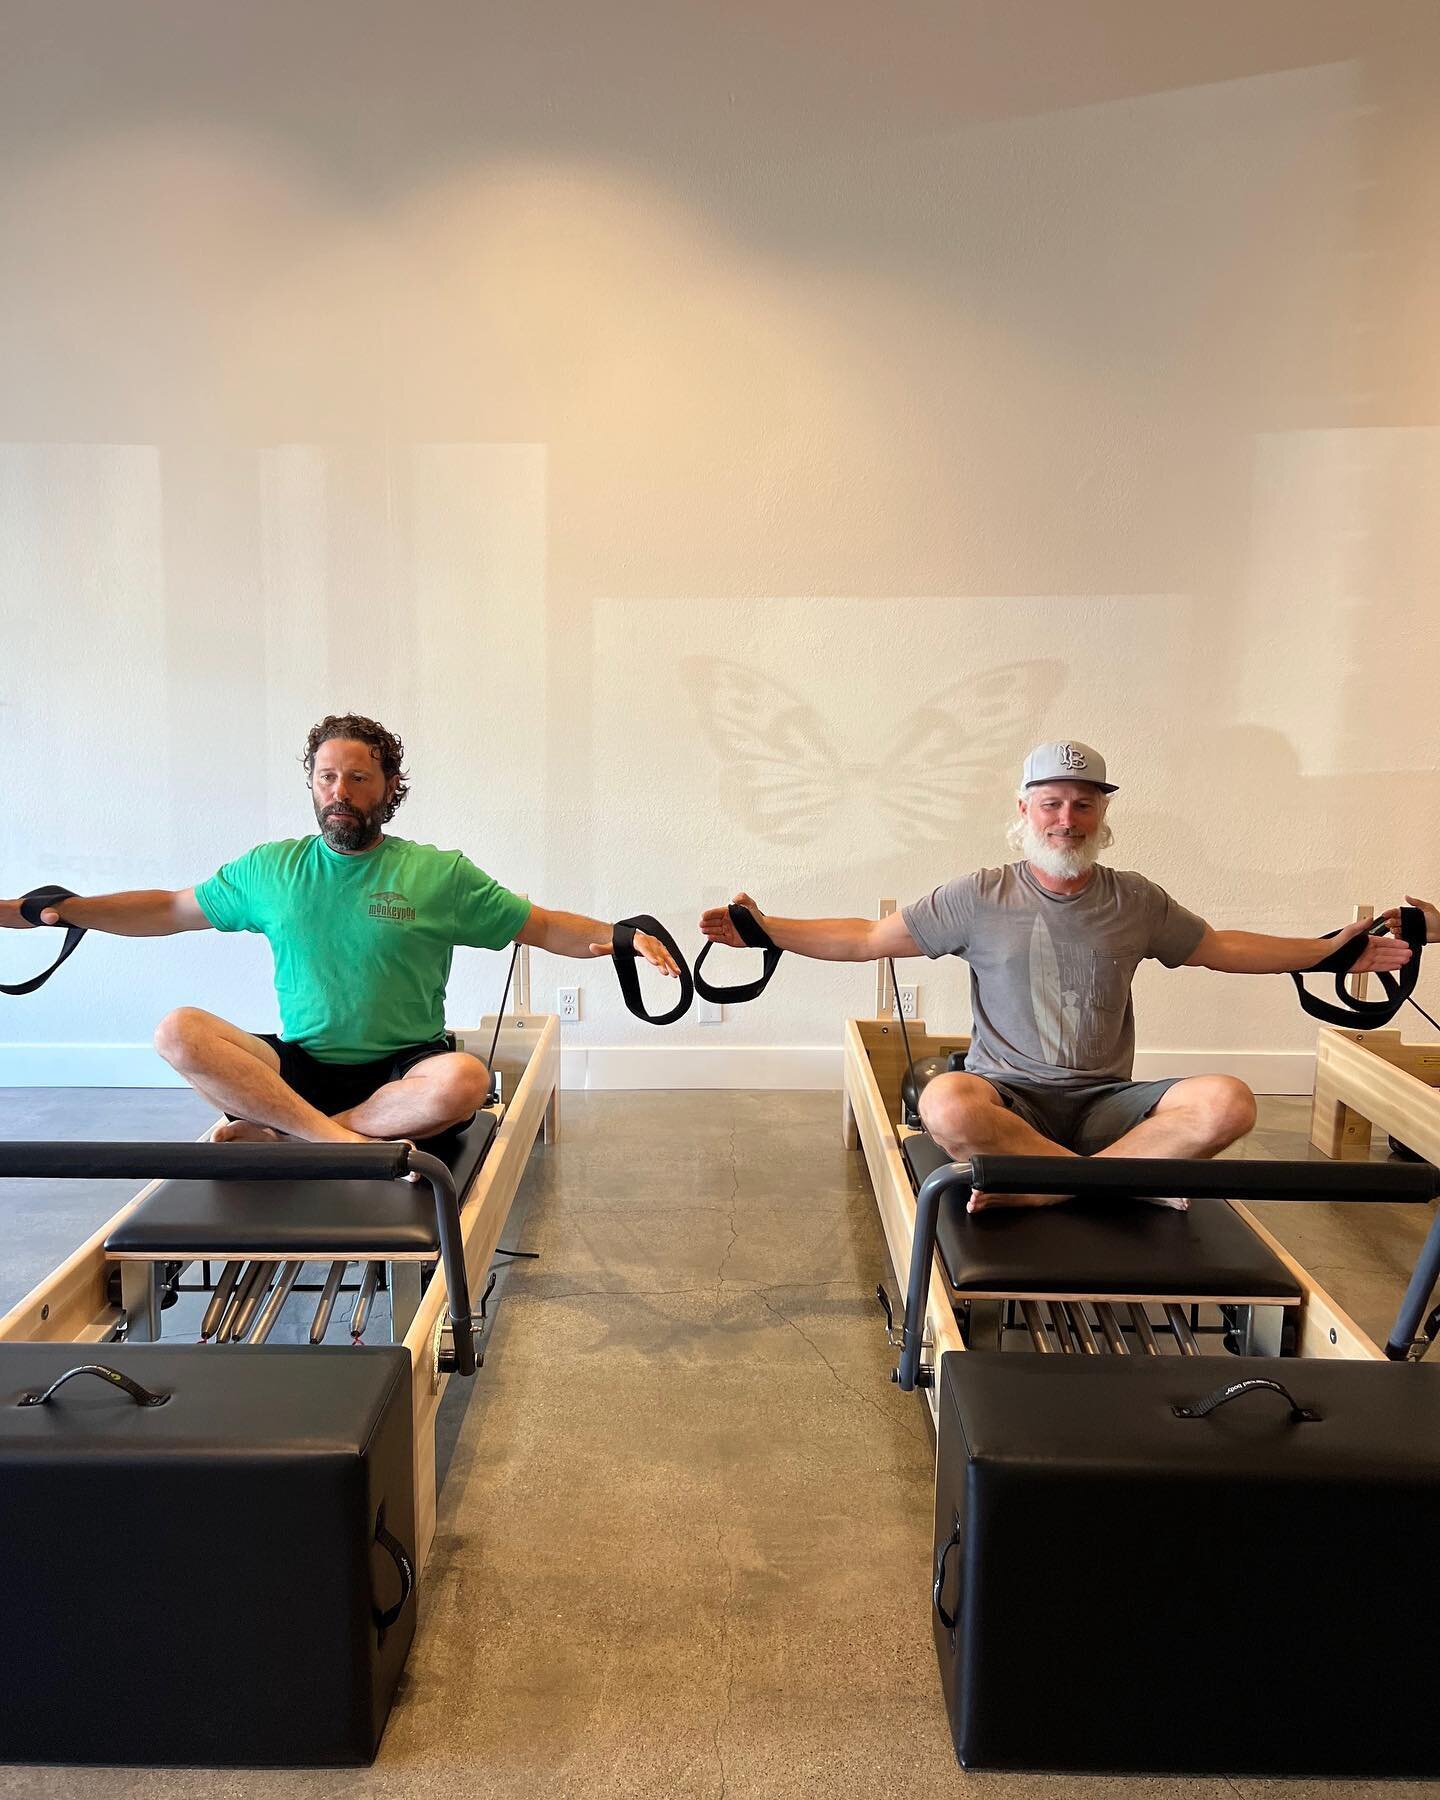 Ruby Pilates offers Private Instruction, Reformer Classes, Wunda Chair Classes, &amp; Springboard Classes in downtown Sebastopol, California. #dowhatmovesyou 

Visit rubypilates.com to check out our class schedule. 

Or email me at hello@rubypilates.